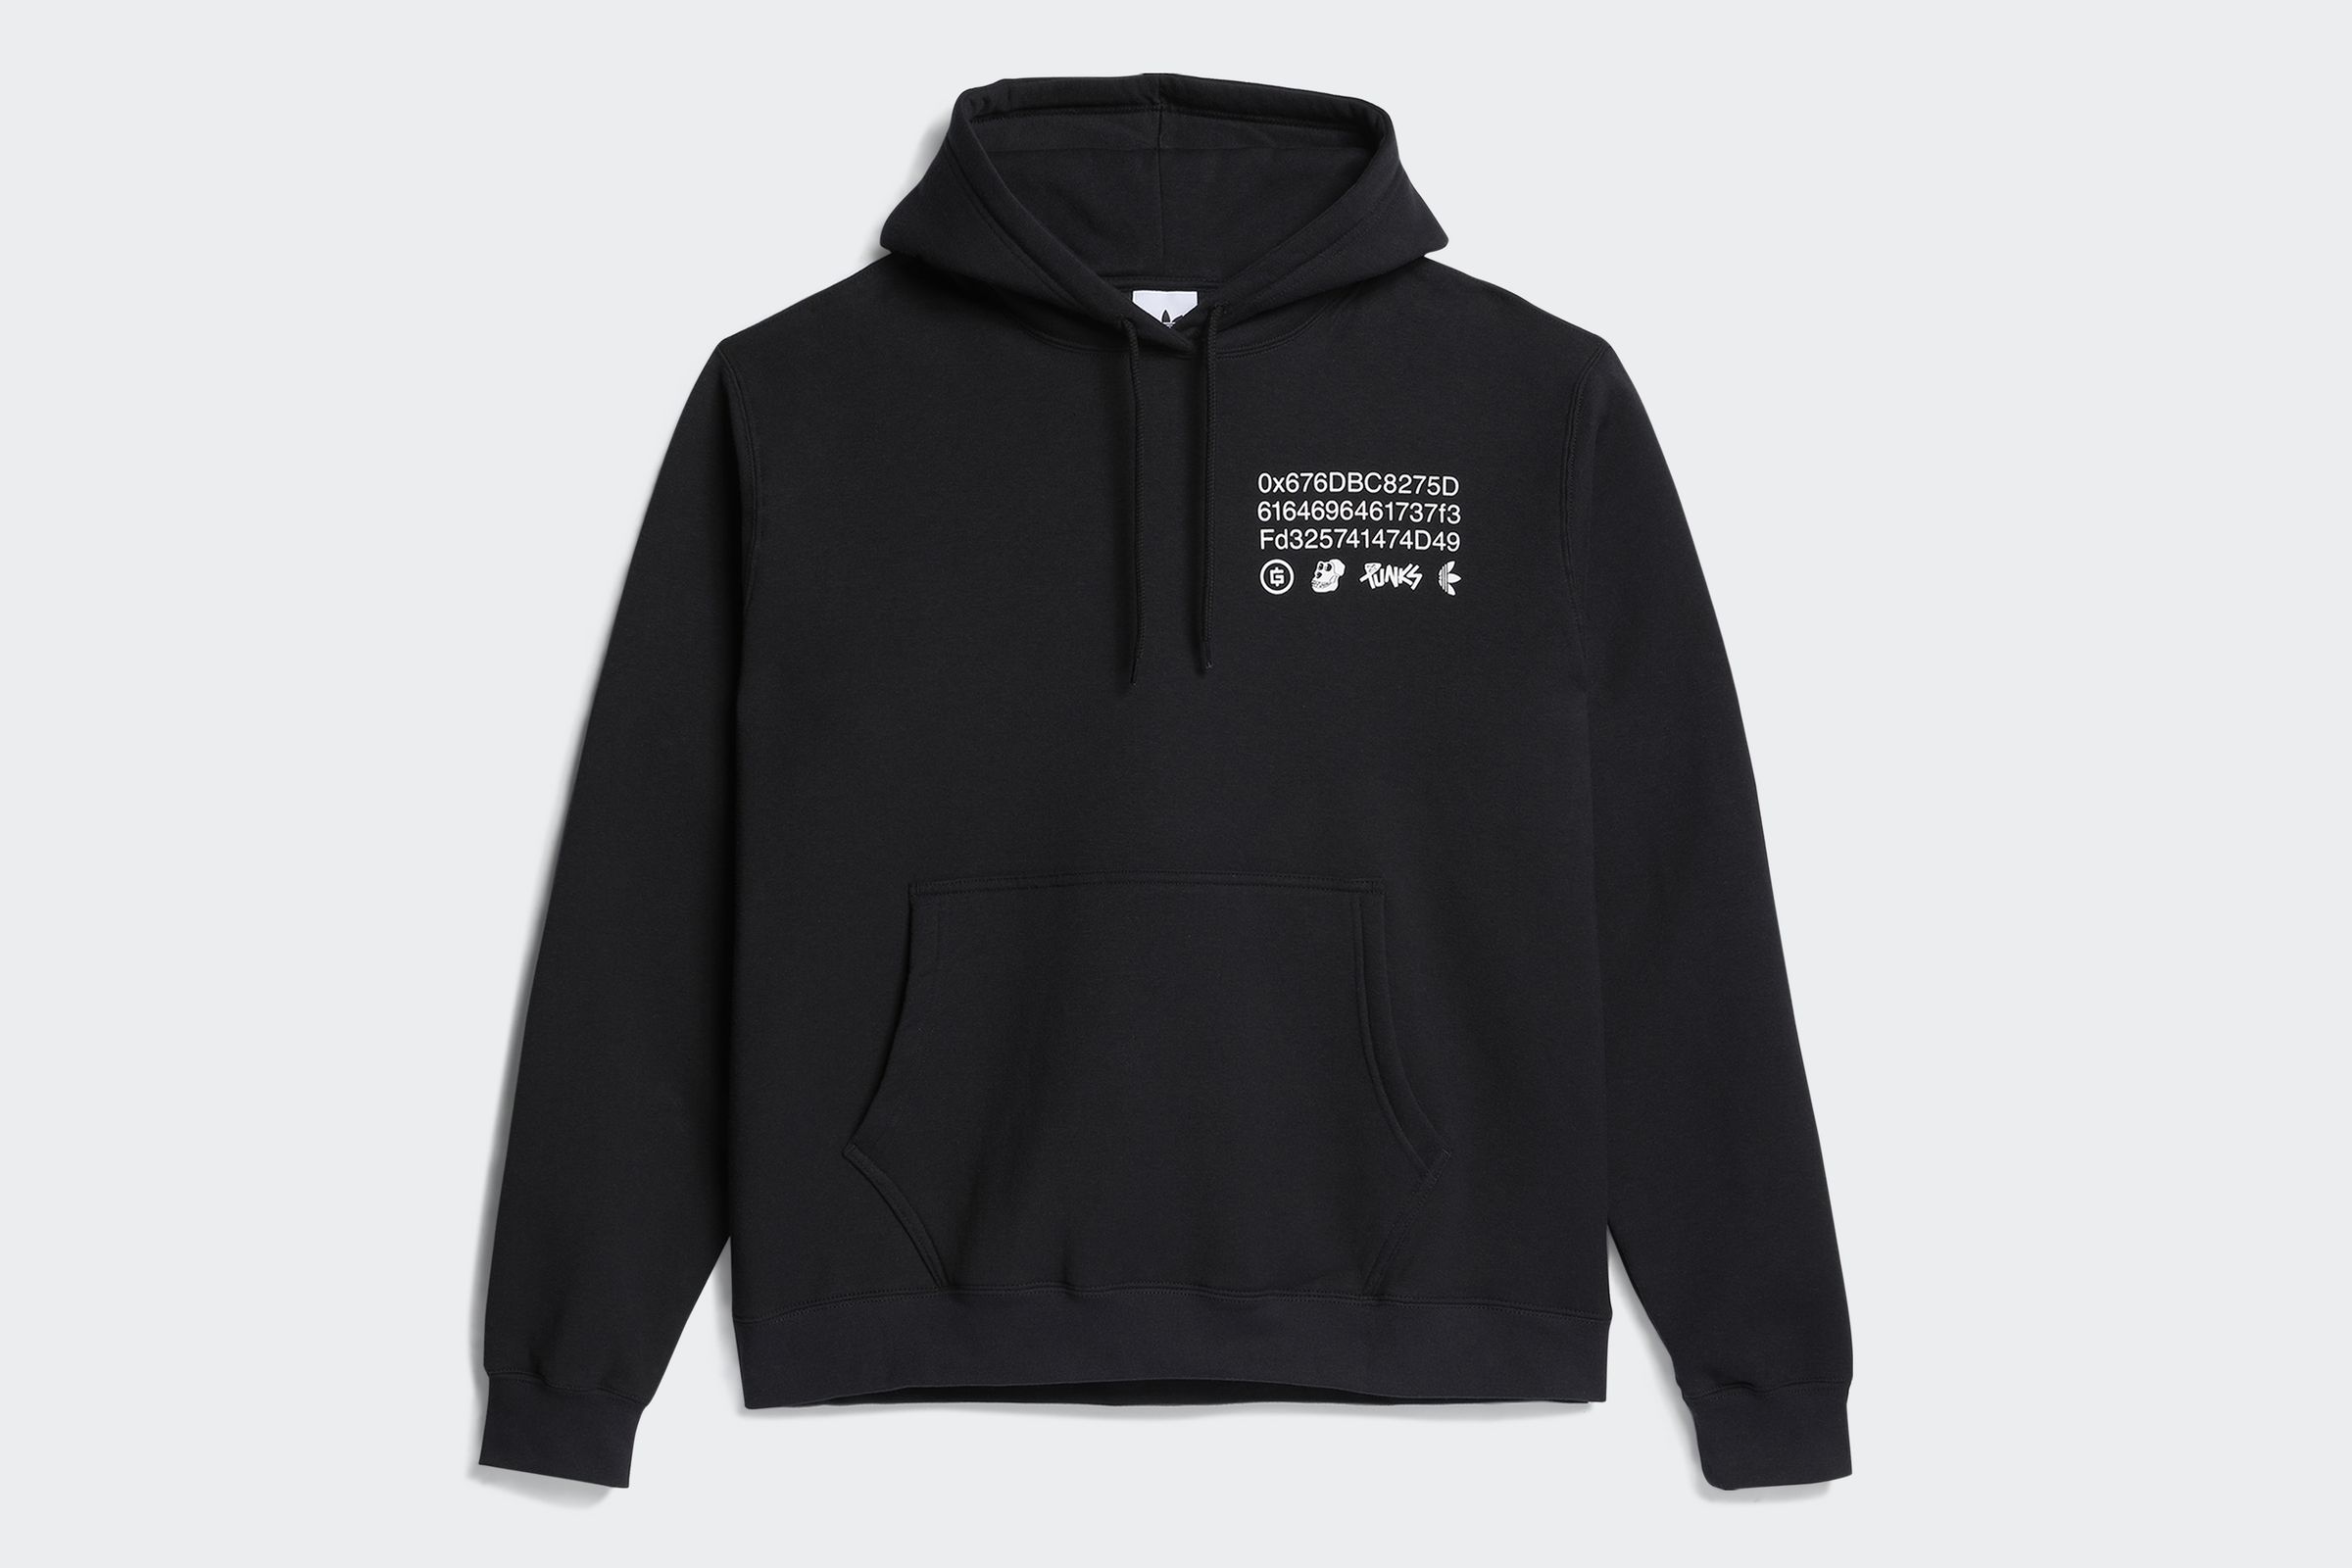 A black hoodie with text and logos on the upper left chest. There’s a blockchain address followed by logos for GMoney, Bored Ape Yacht Club, Punks Comics, and Adidas.